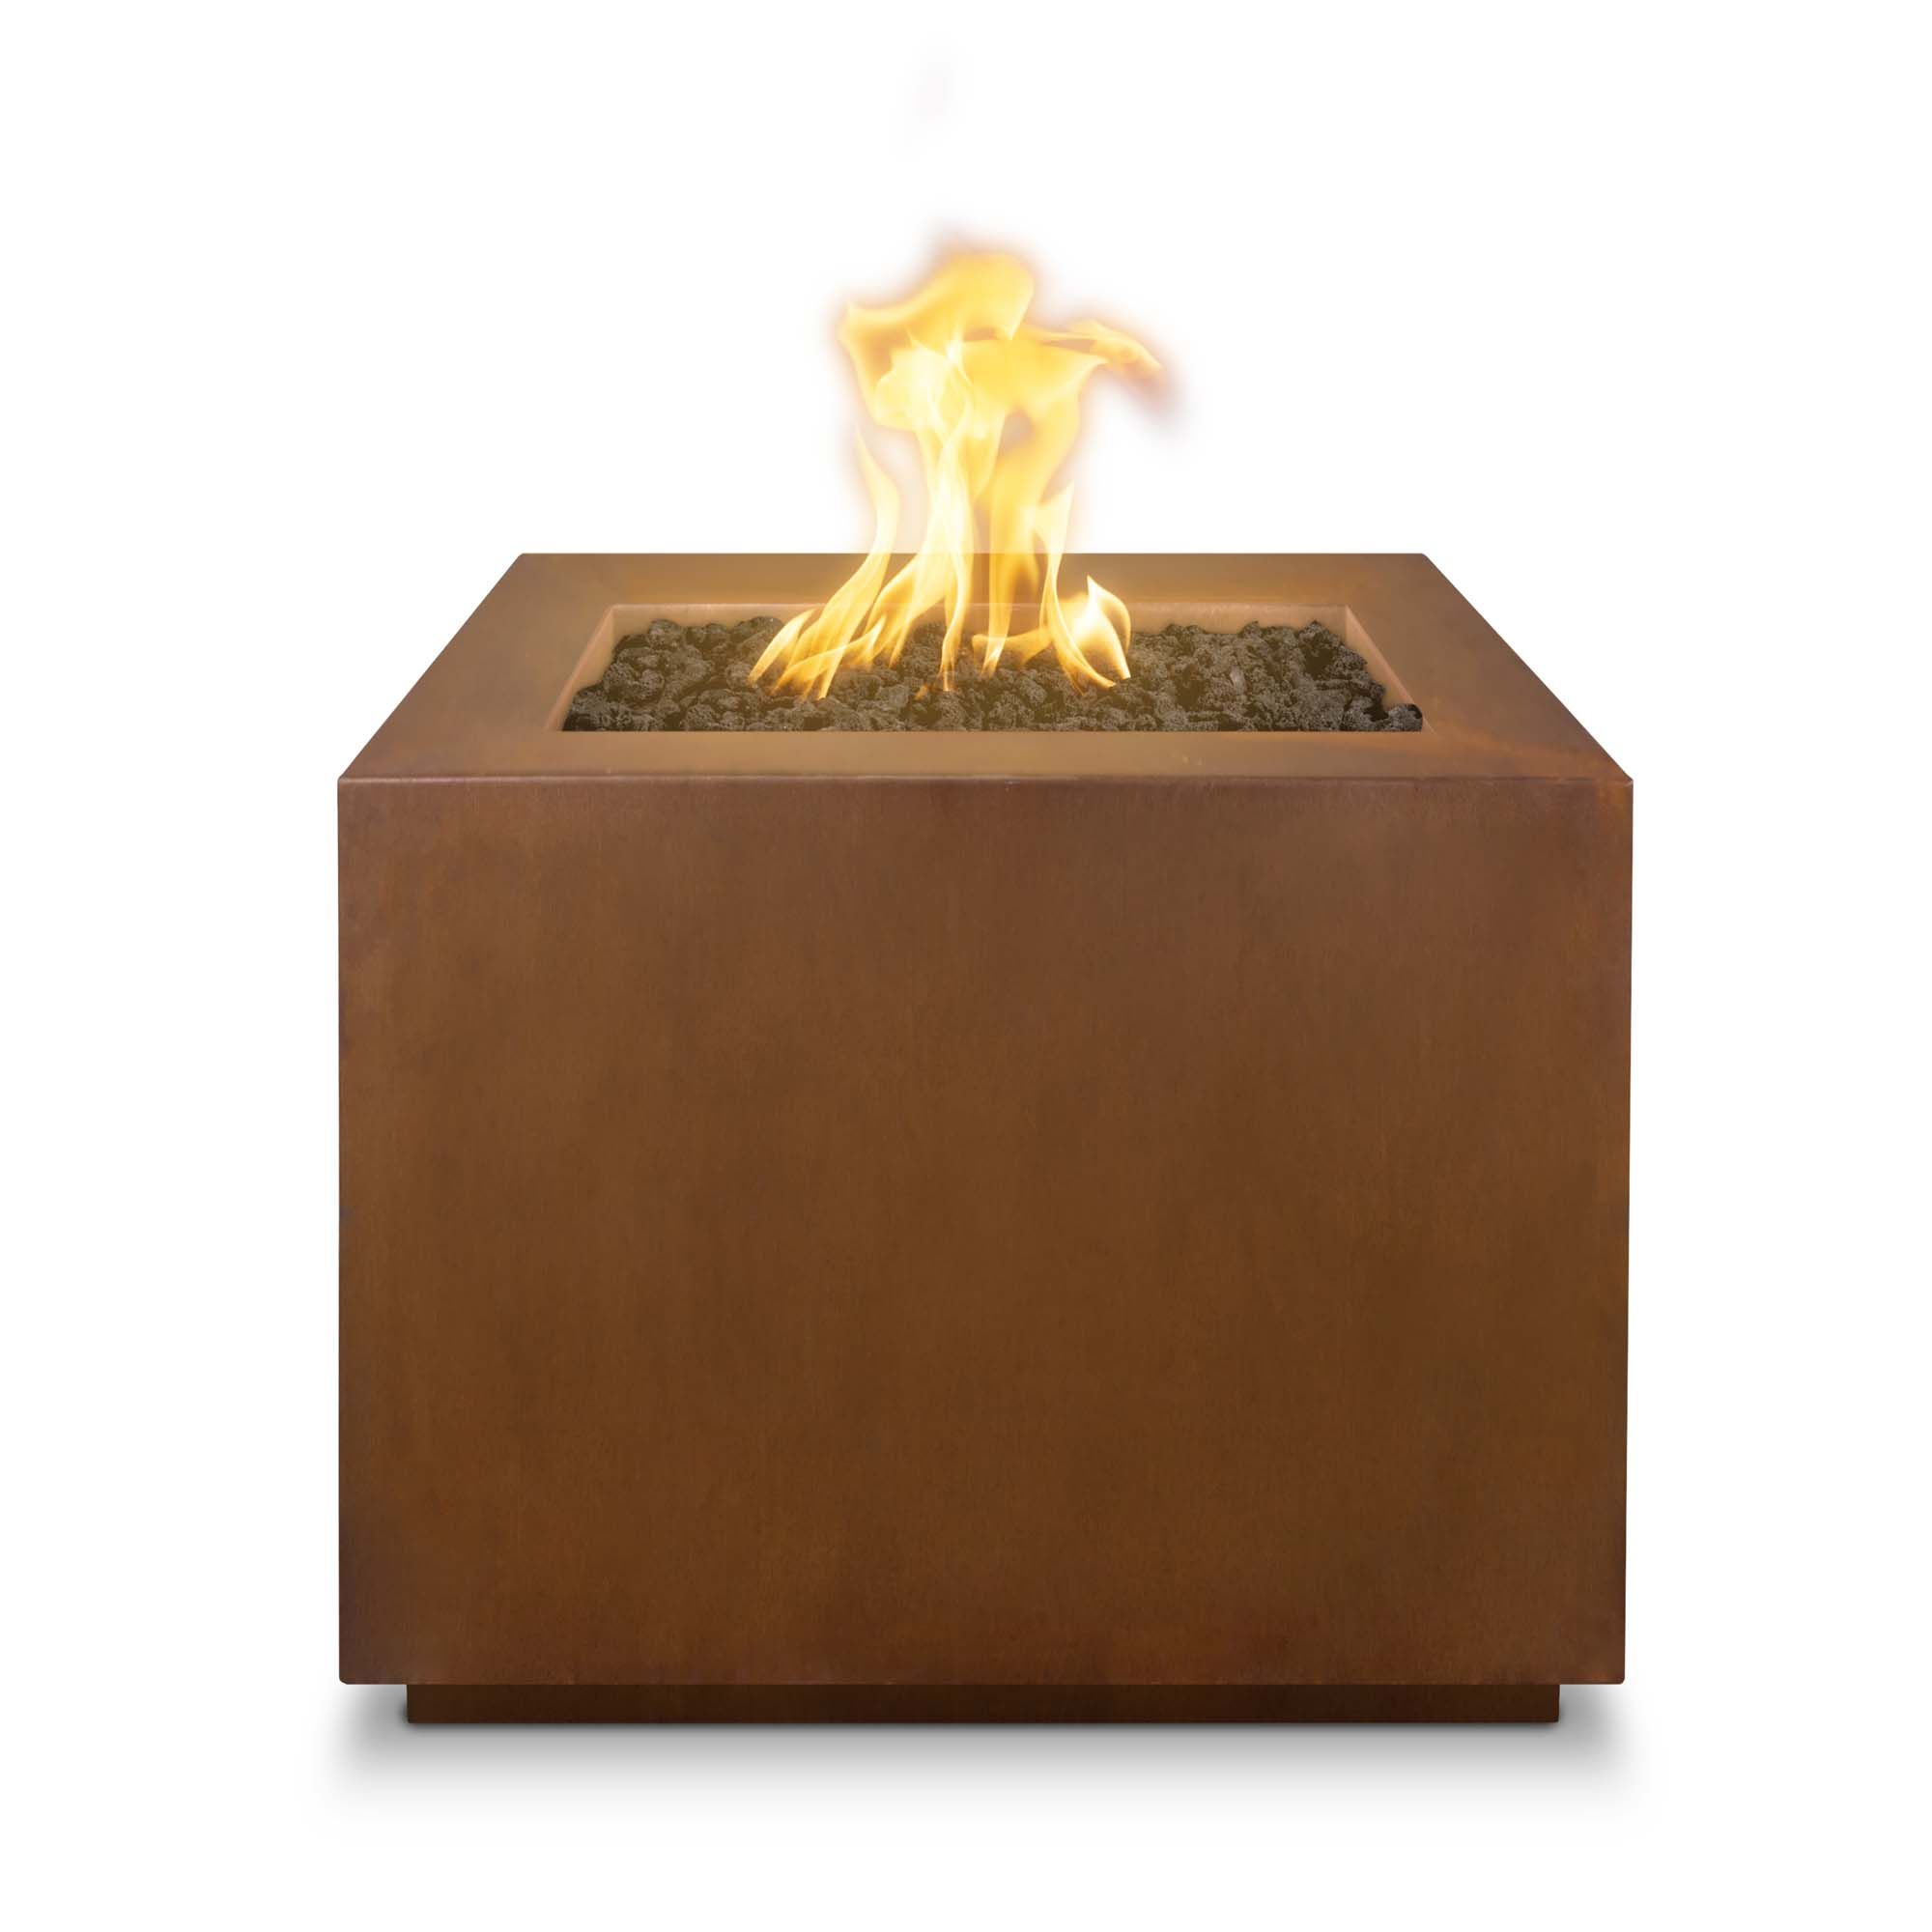 Fire Pits the "Forma" Collection Corten Steel - The Outdoor Plus (TOP Fire Pit Size: 30", TOP Ignition Options: Match Lit Ignition)